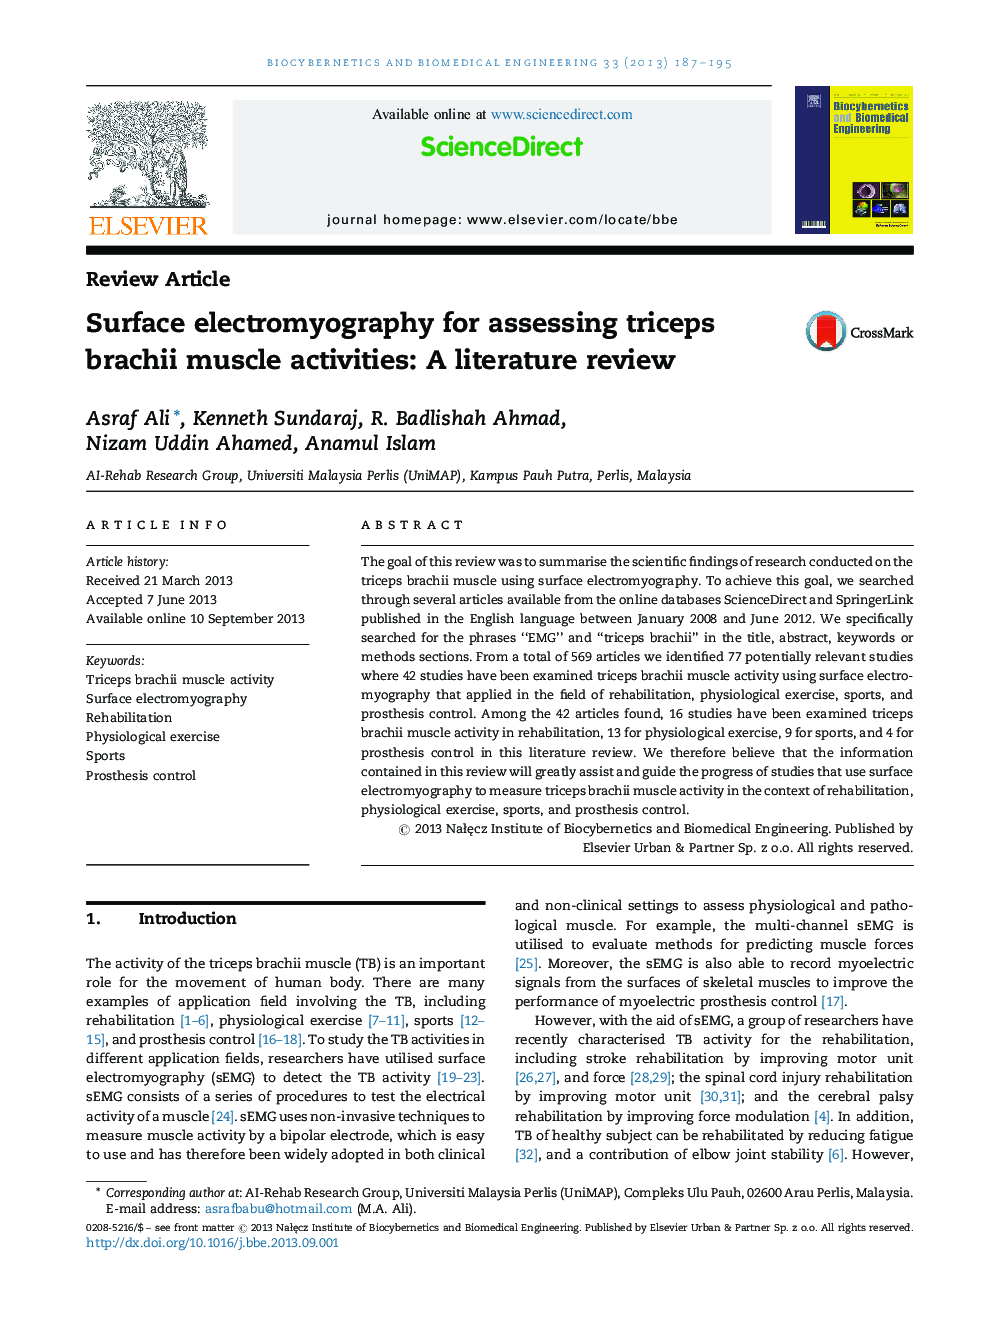 Surface electromyography for assessing triceps brachii muscle activities: A literature review